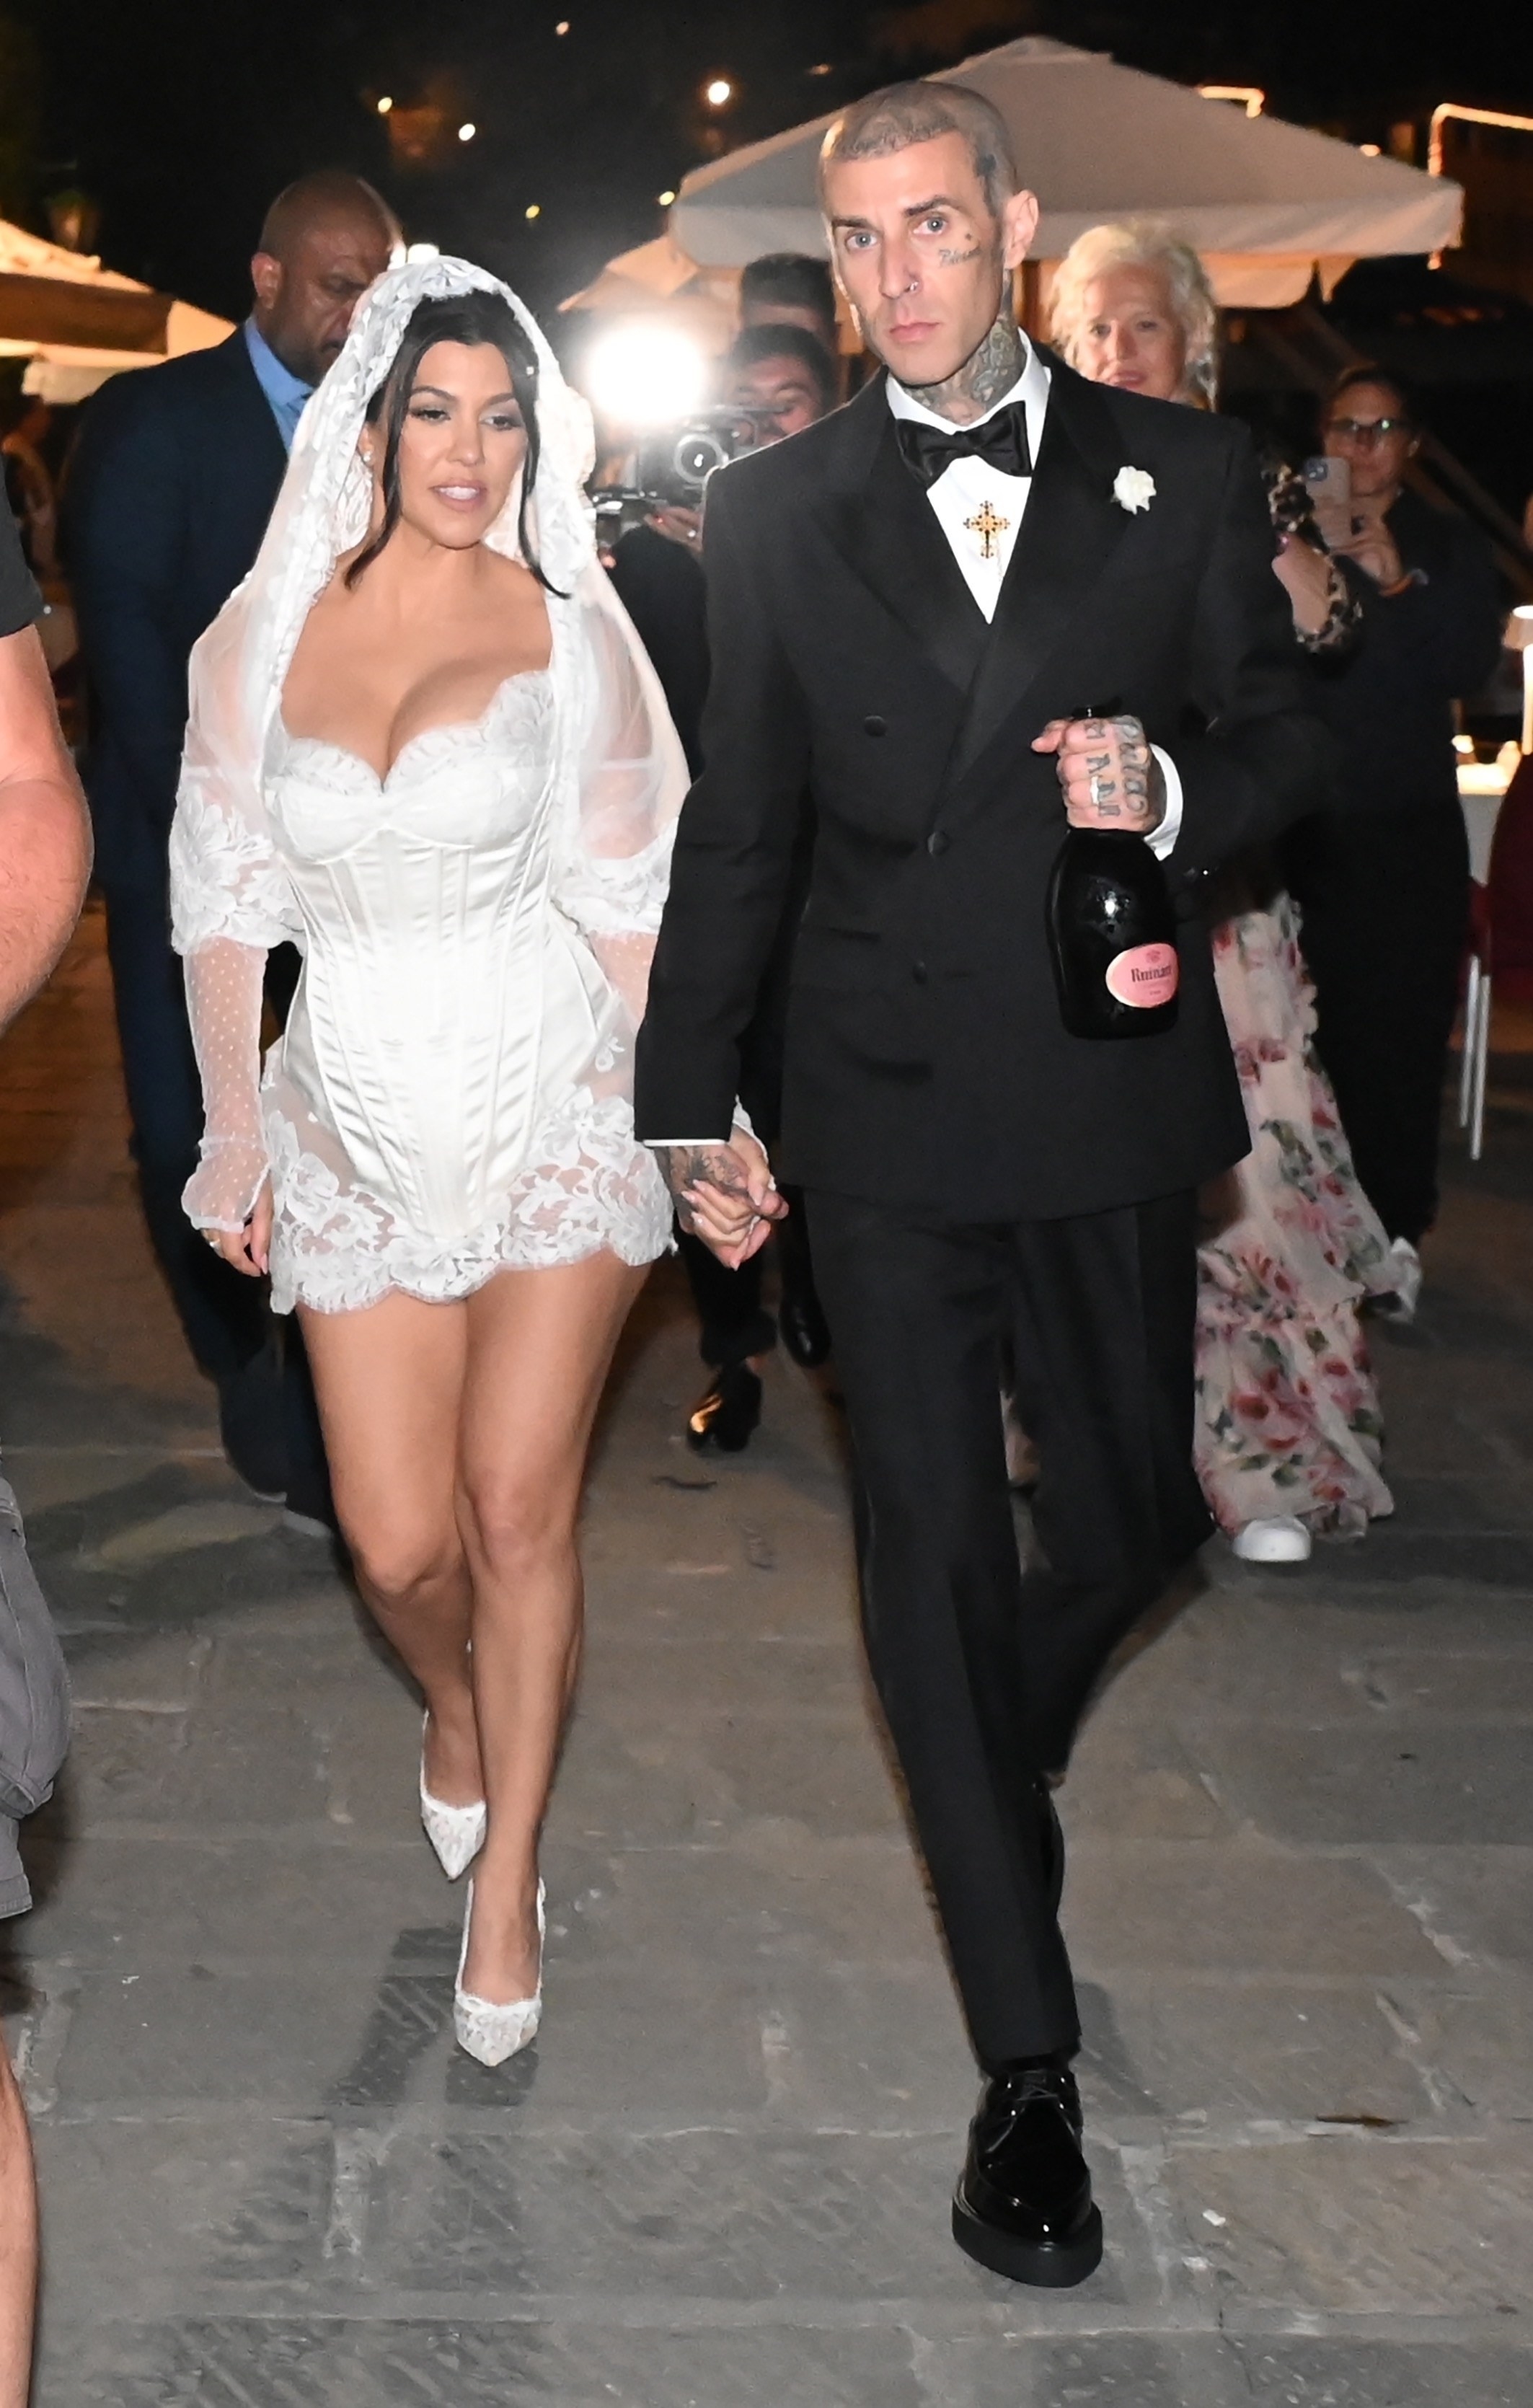 Kourtney is now wearing a much smaller veil that falls across her shoulders